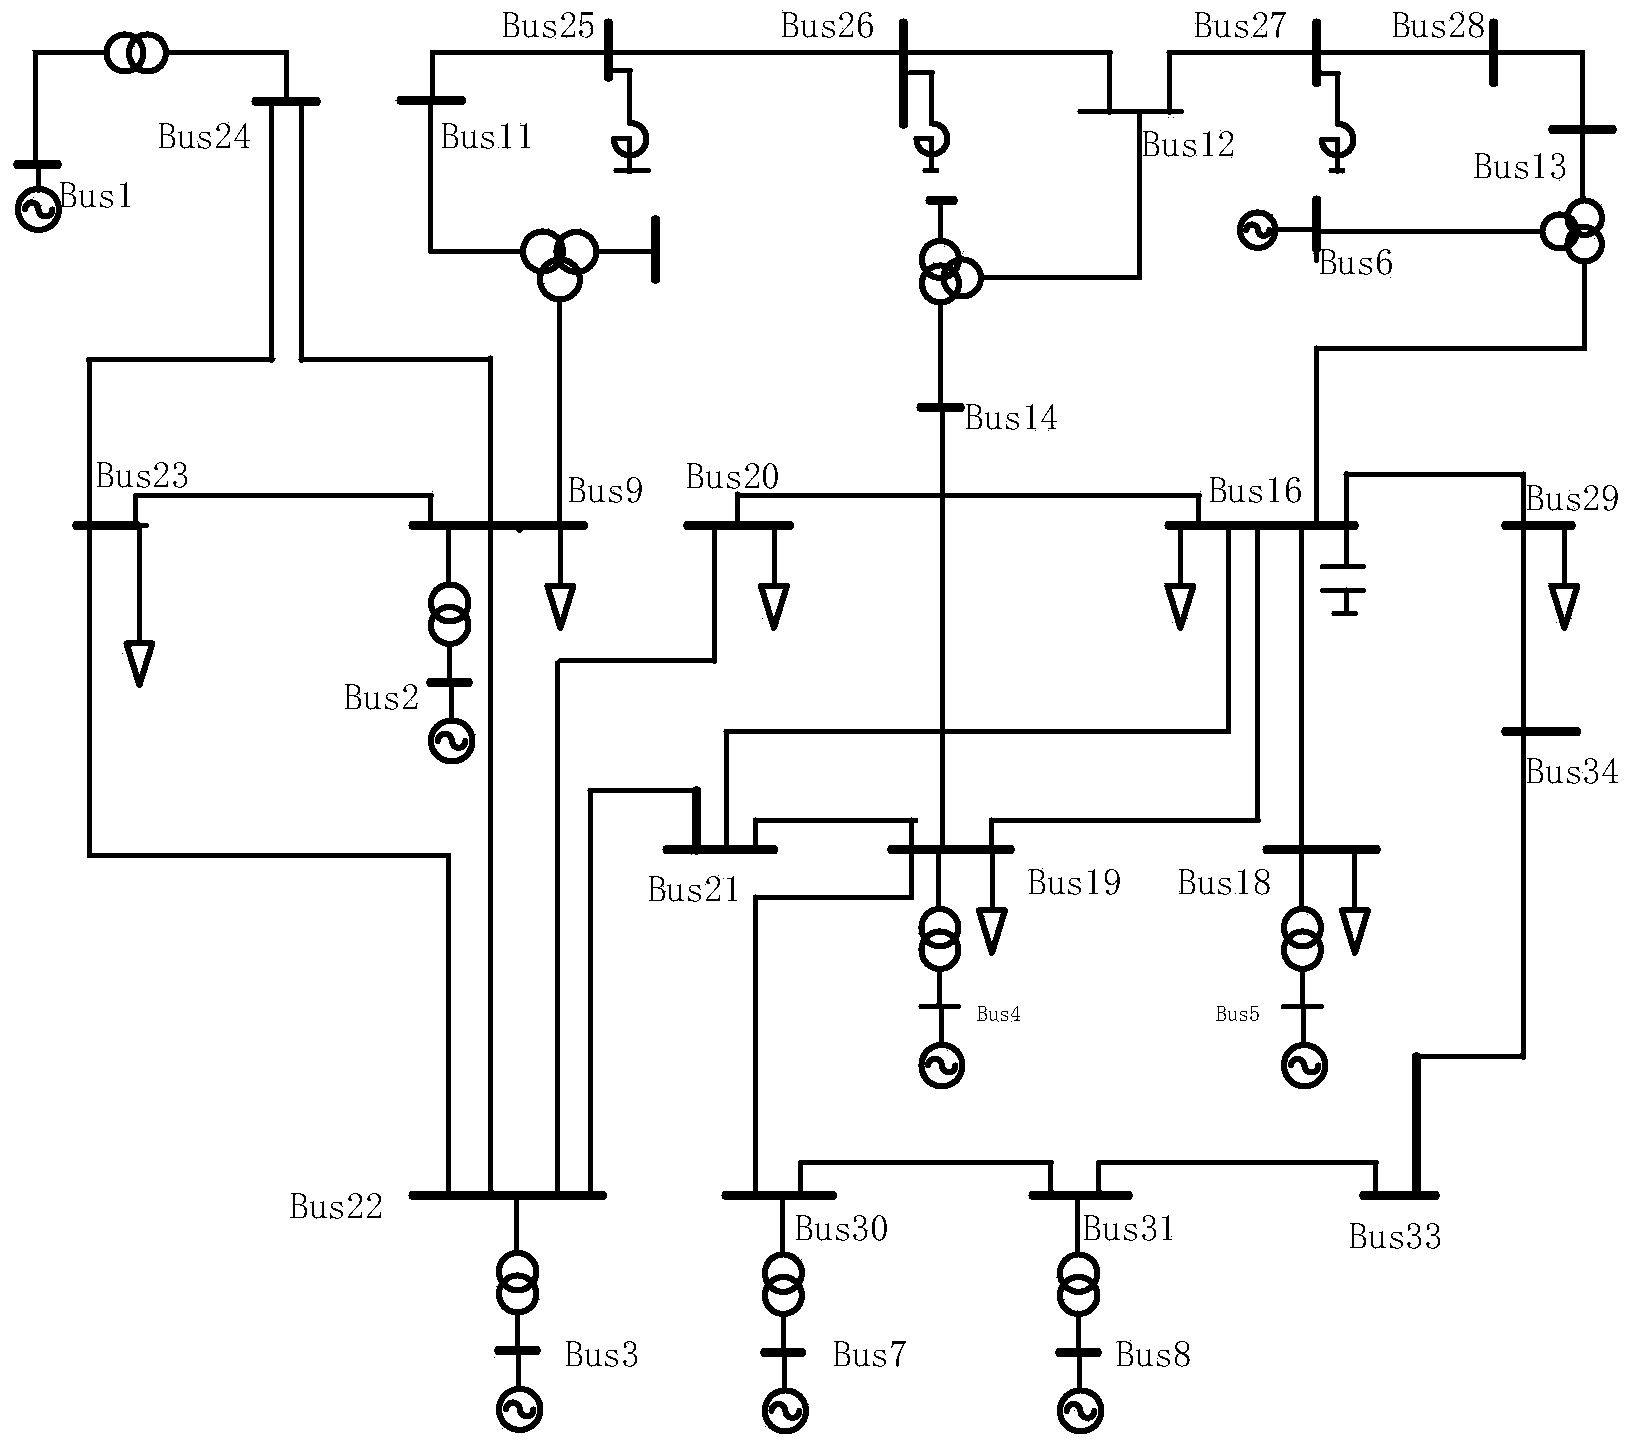 Electric power system emergency control method based on response information